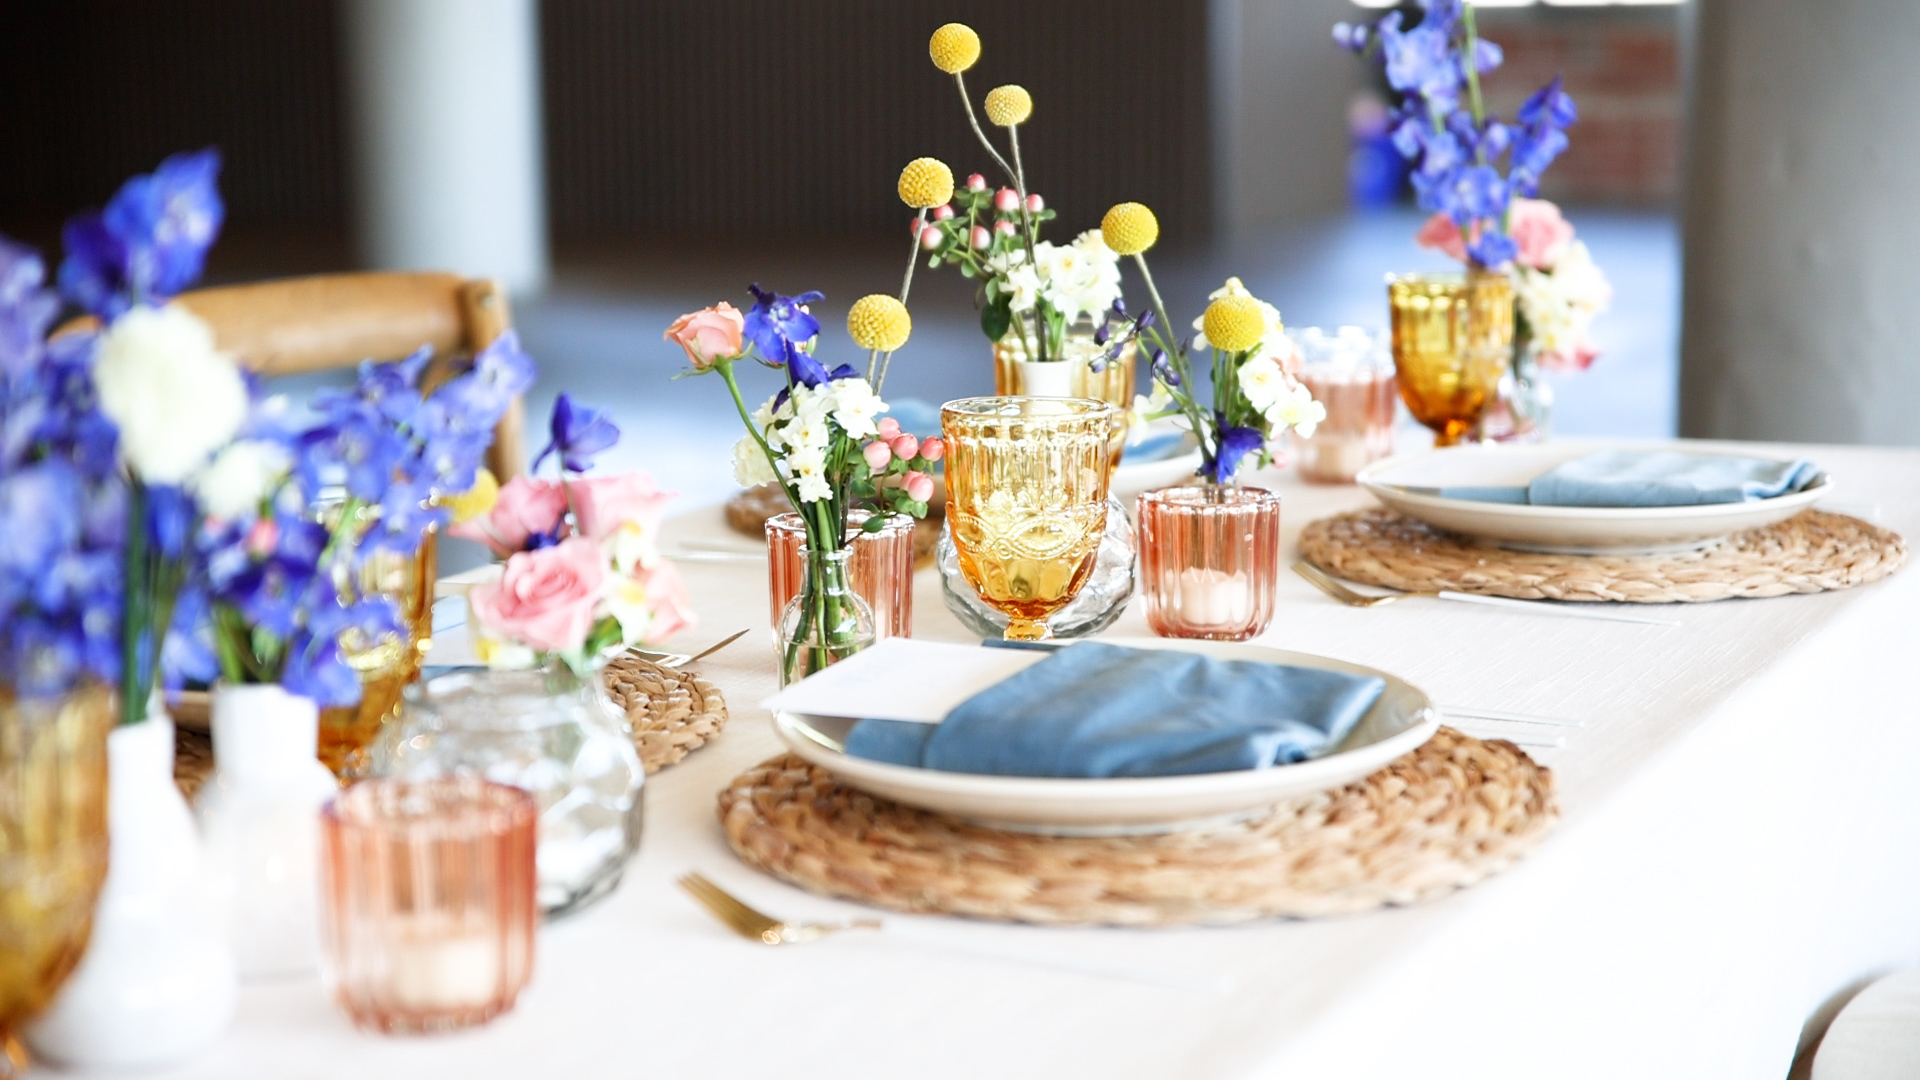 Table setting details with blue flowers and napkins on a white table cloth